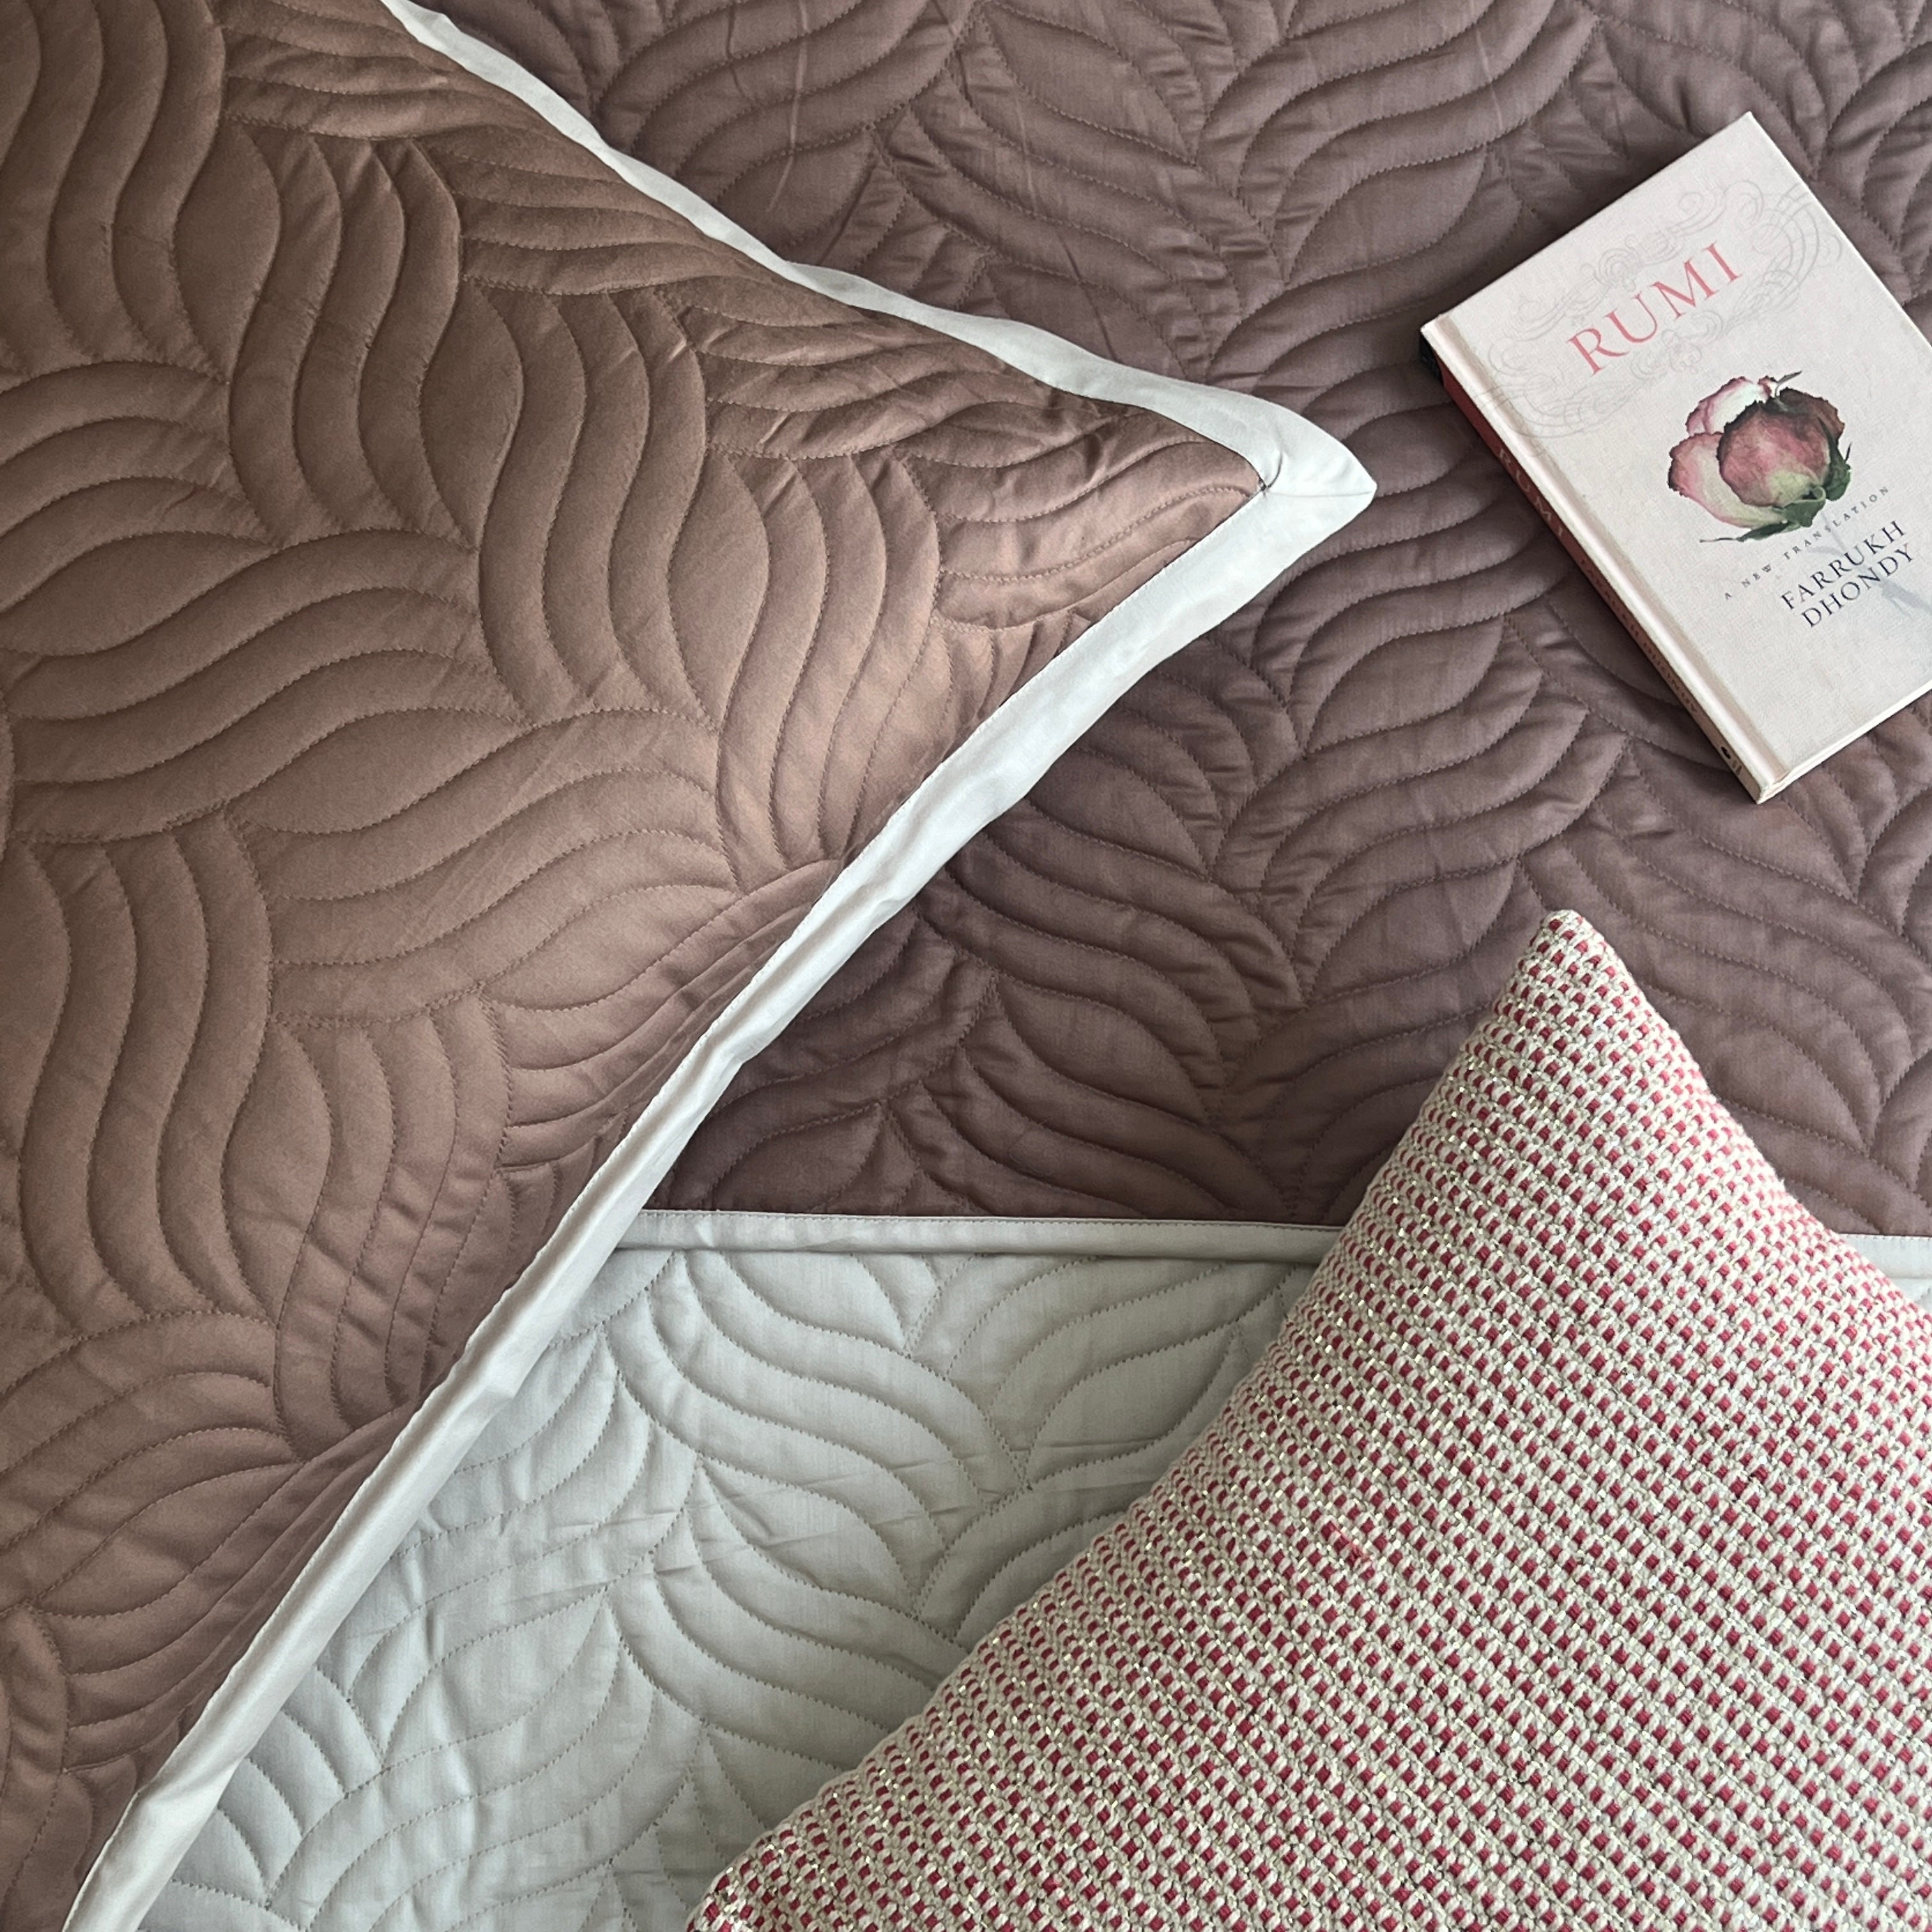 Quilted Brandy Rose and Beige Comber Reversible Bedspread